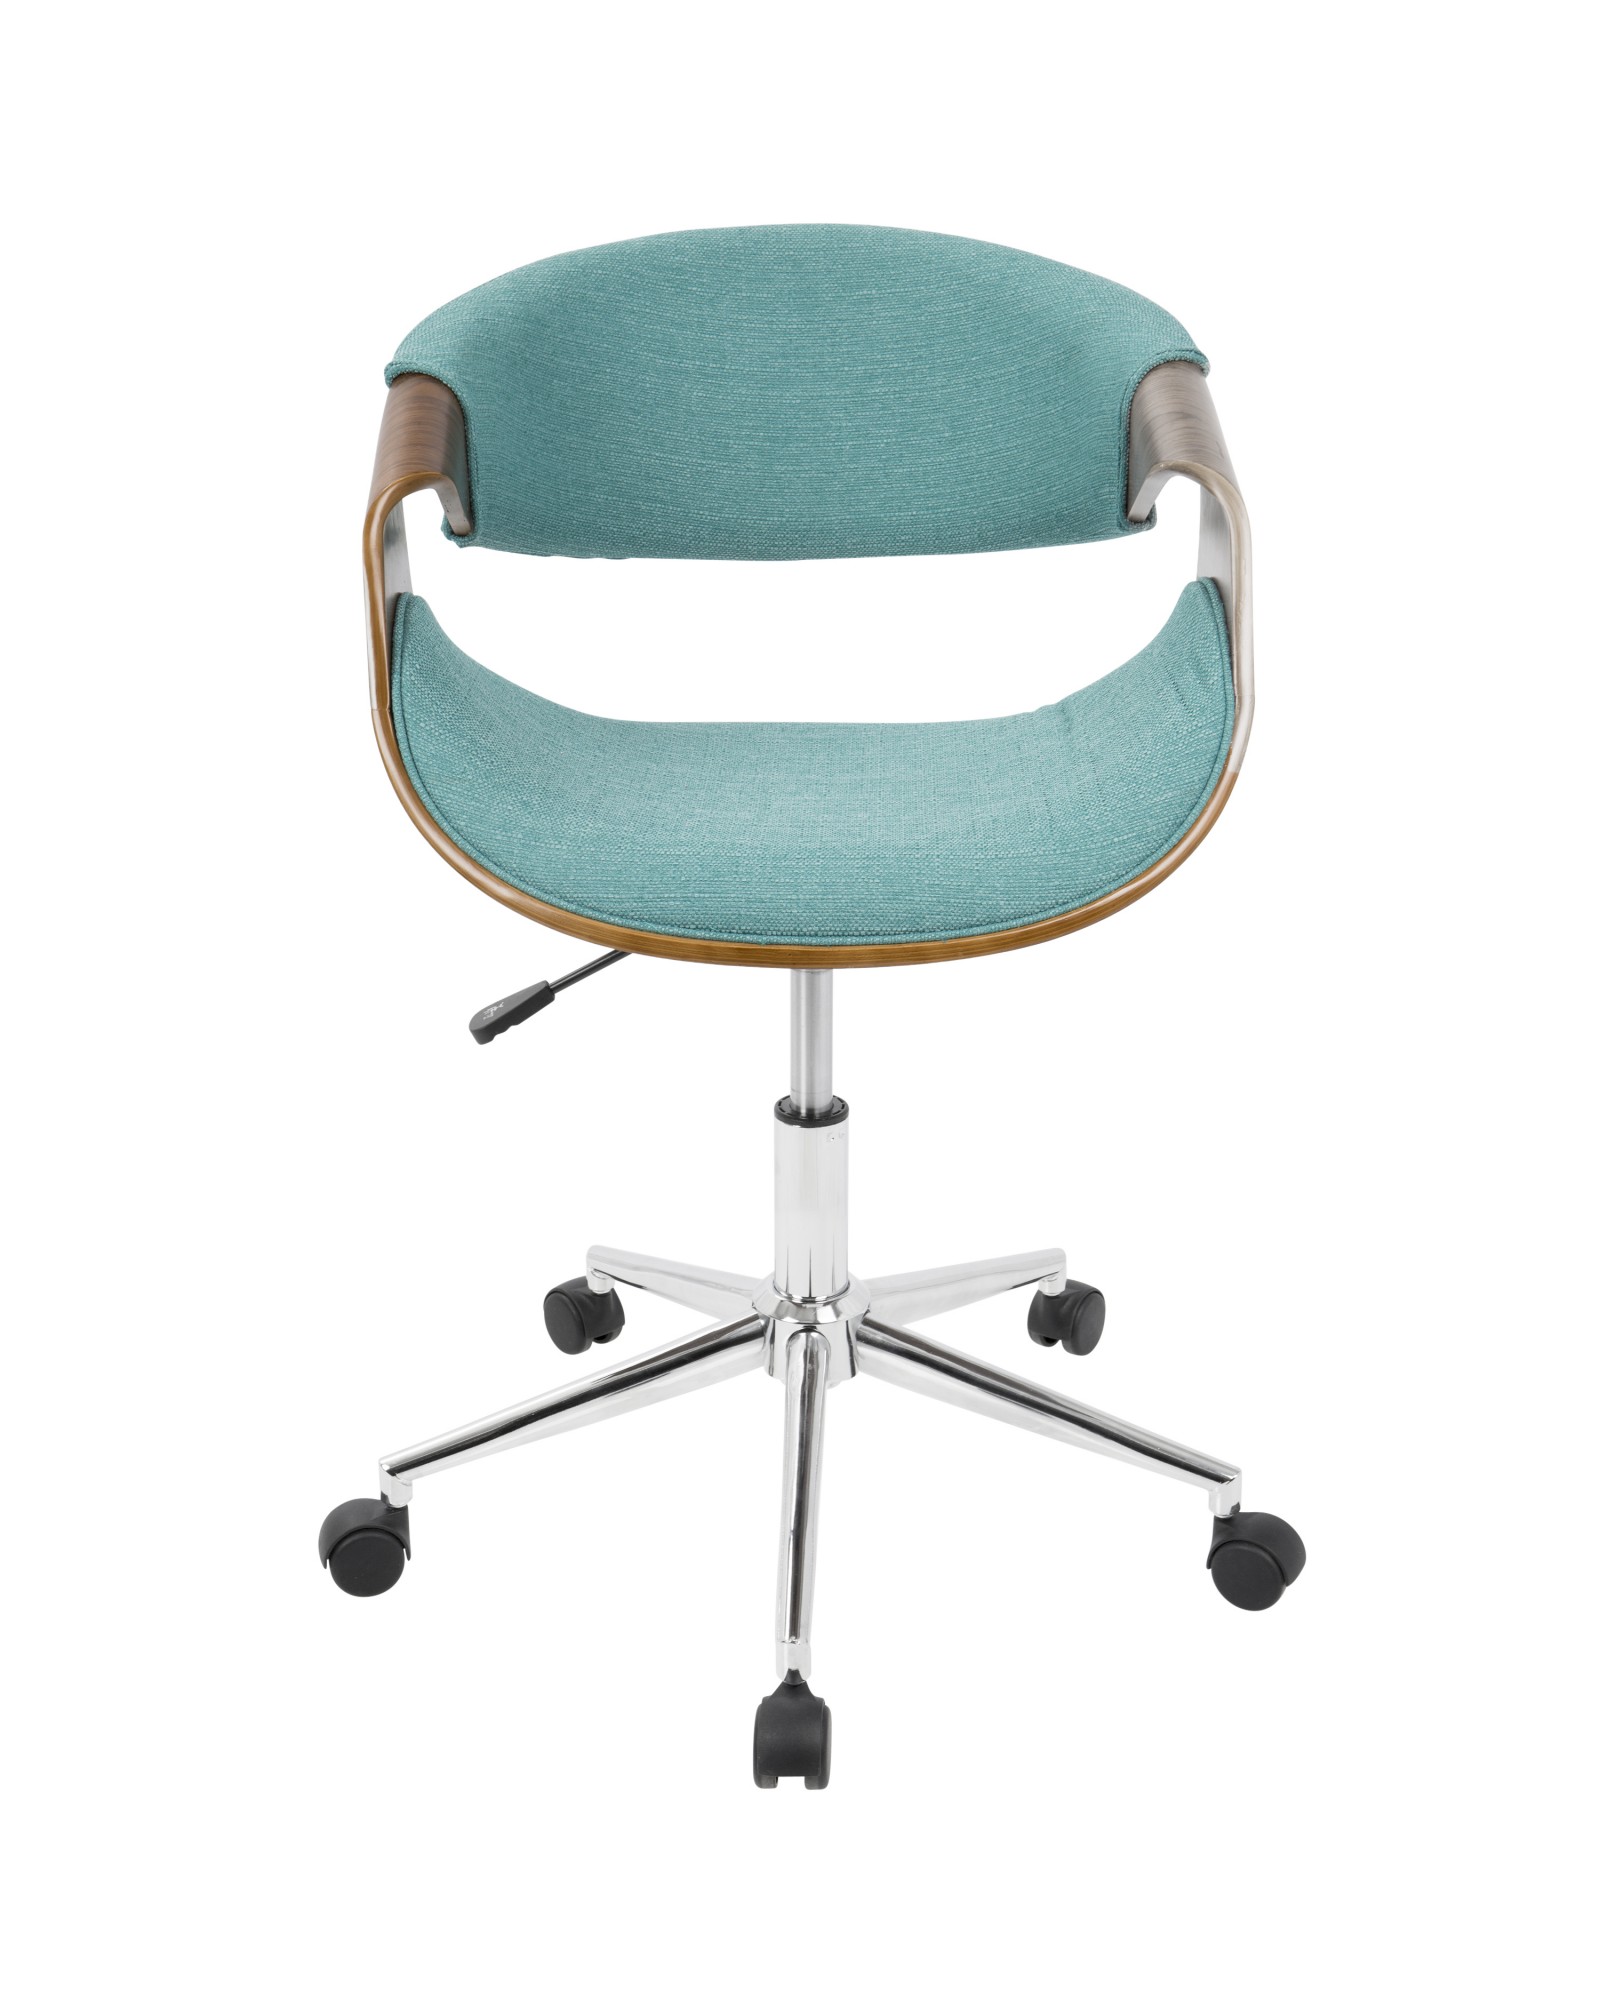 Curvo Mid-Century Modern Office Chair in Walnut and Teal